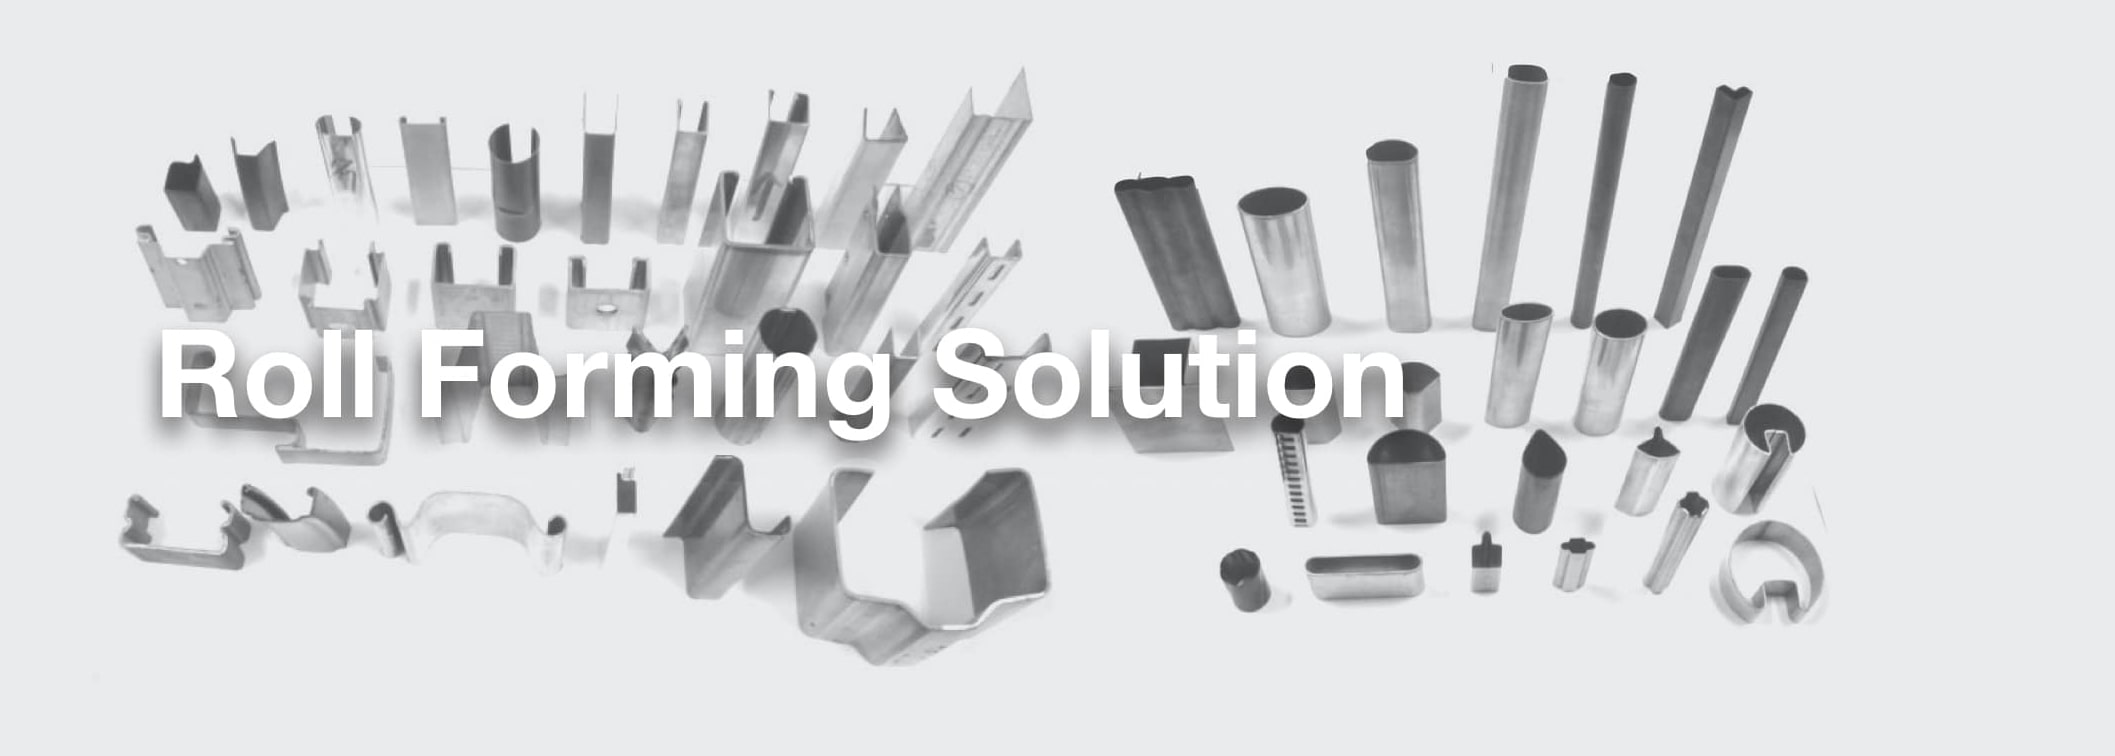 Roll Forming Solution